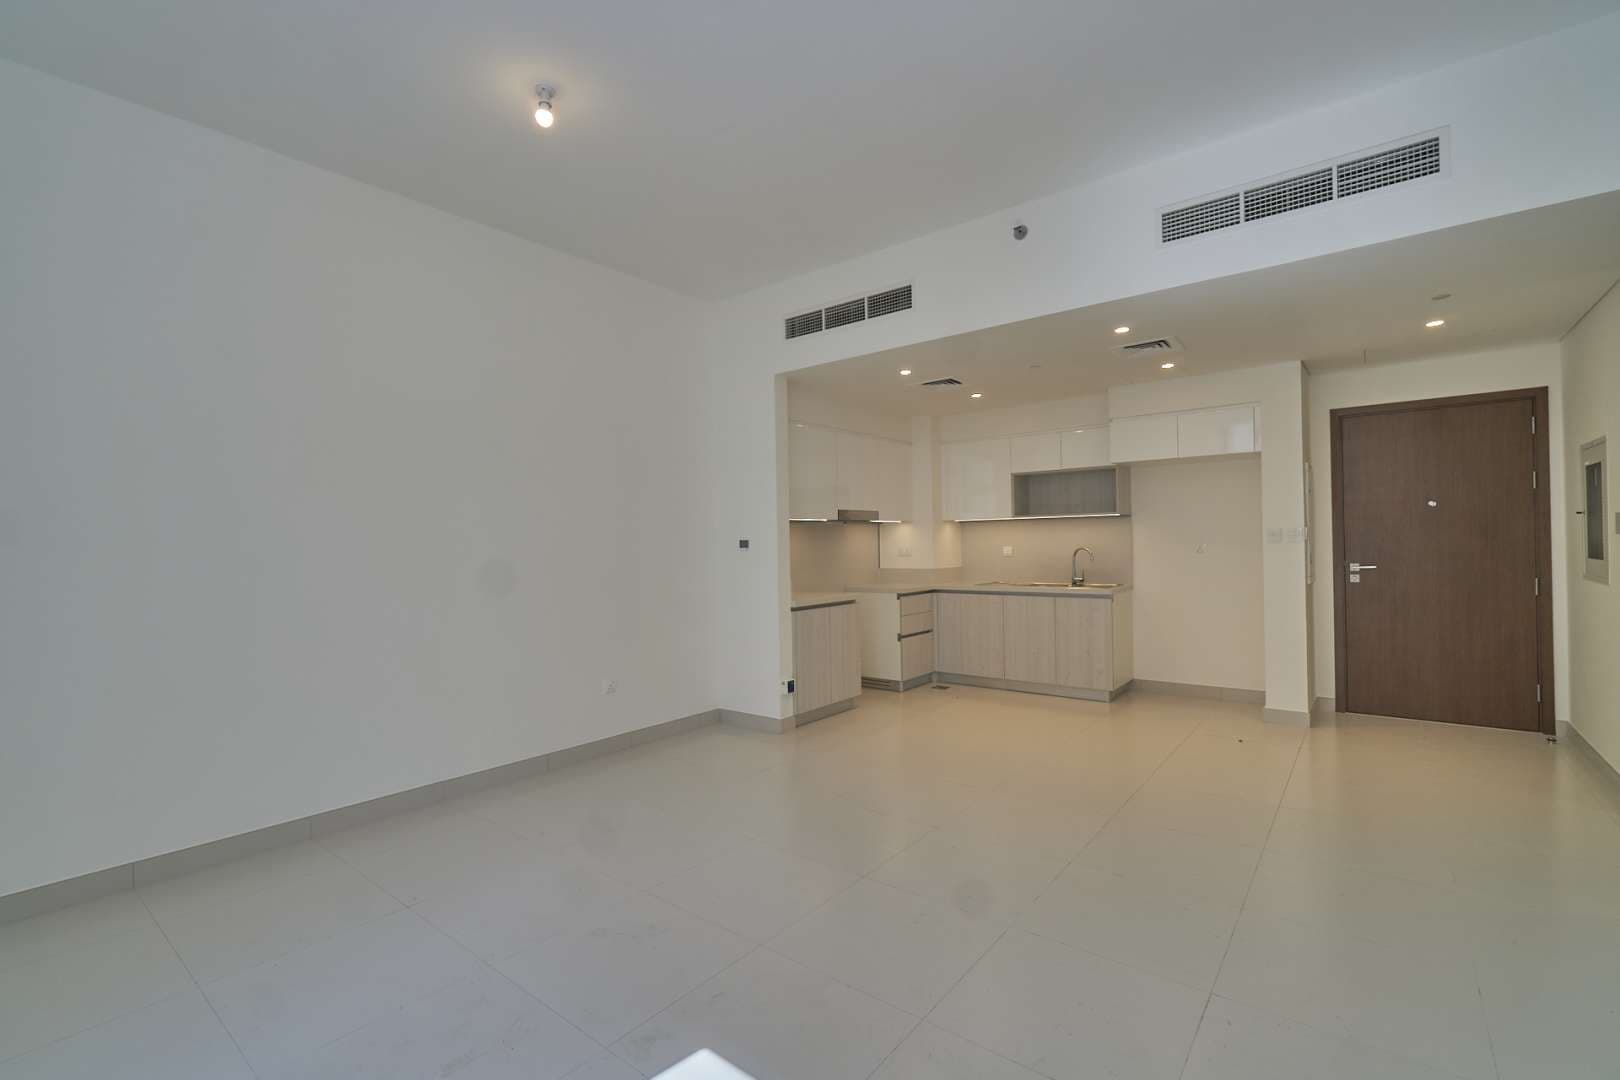 2 Bedroom Apartment For Rent Park Point Lp08887 163a56be493f9100.jpg